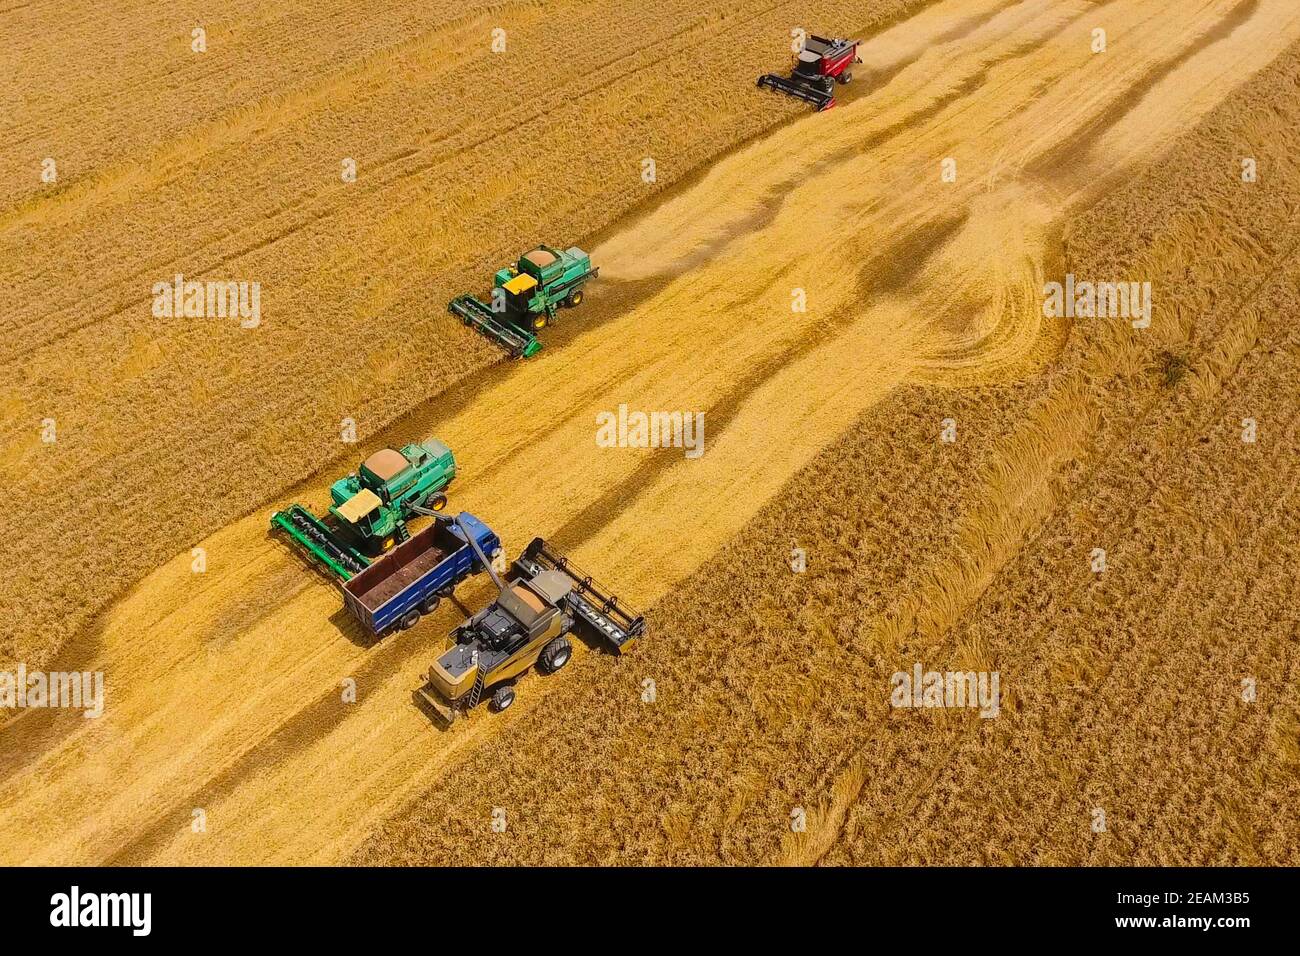 Harvesting wheat harvester. Agricultural machines harvest grain Stock Photo